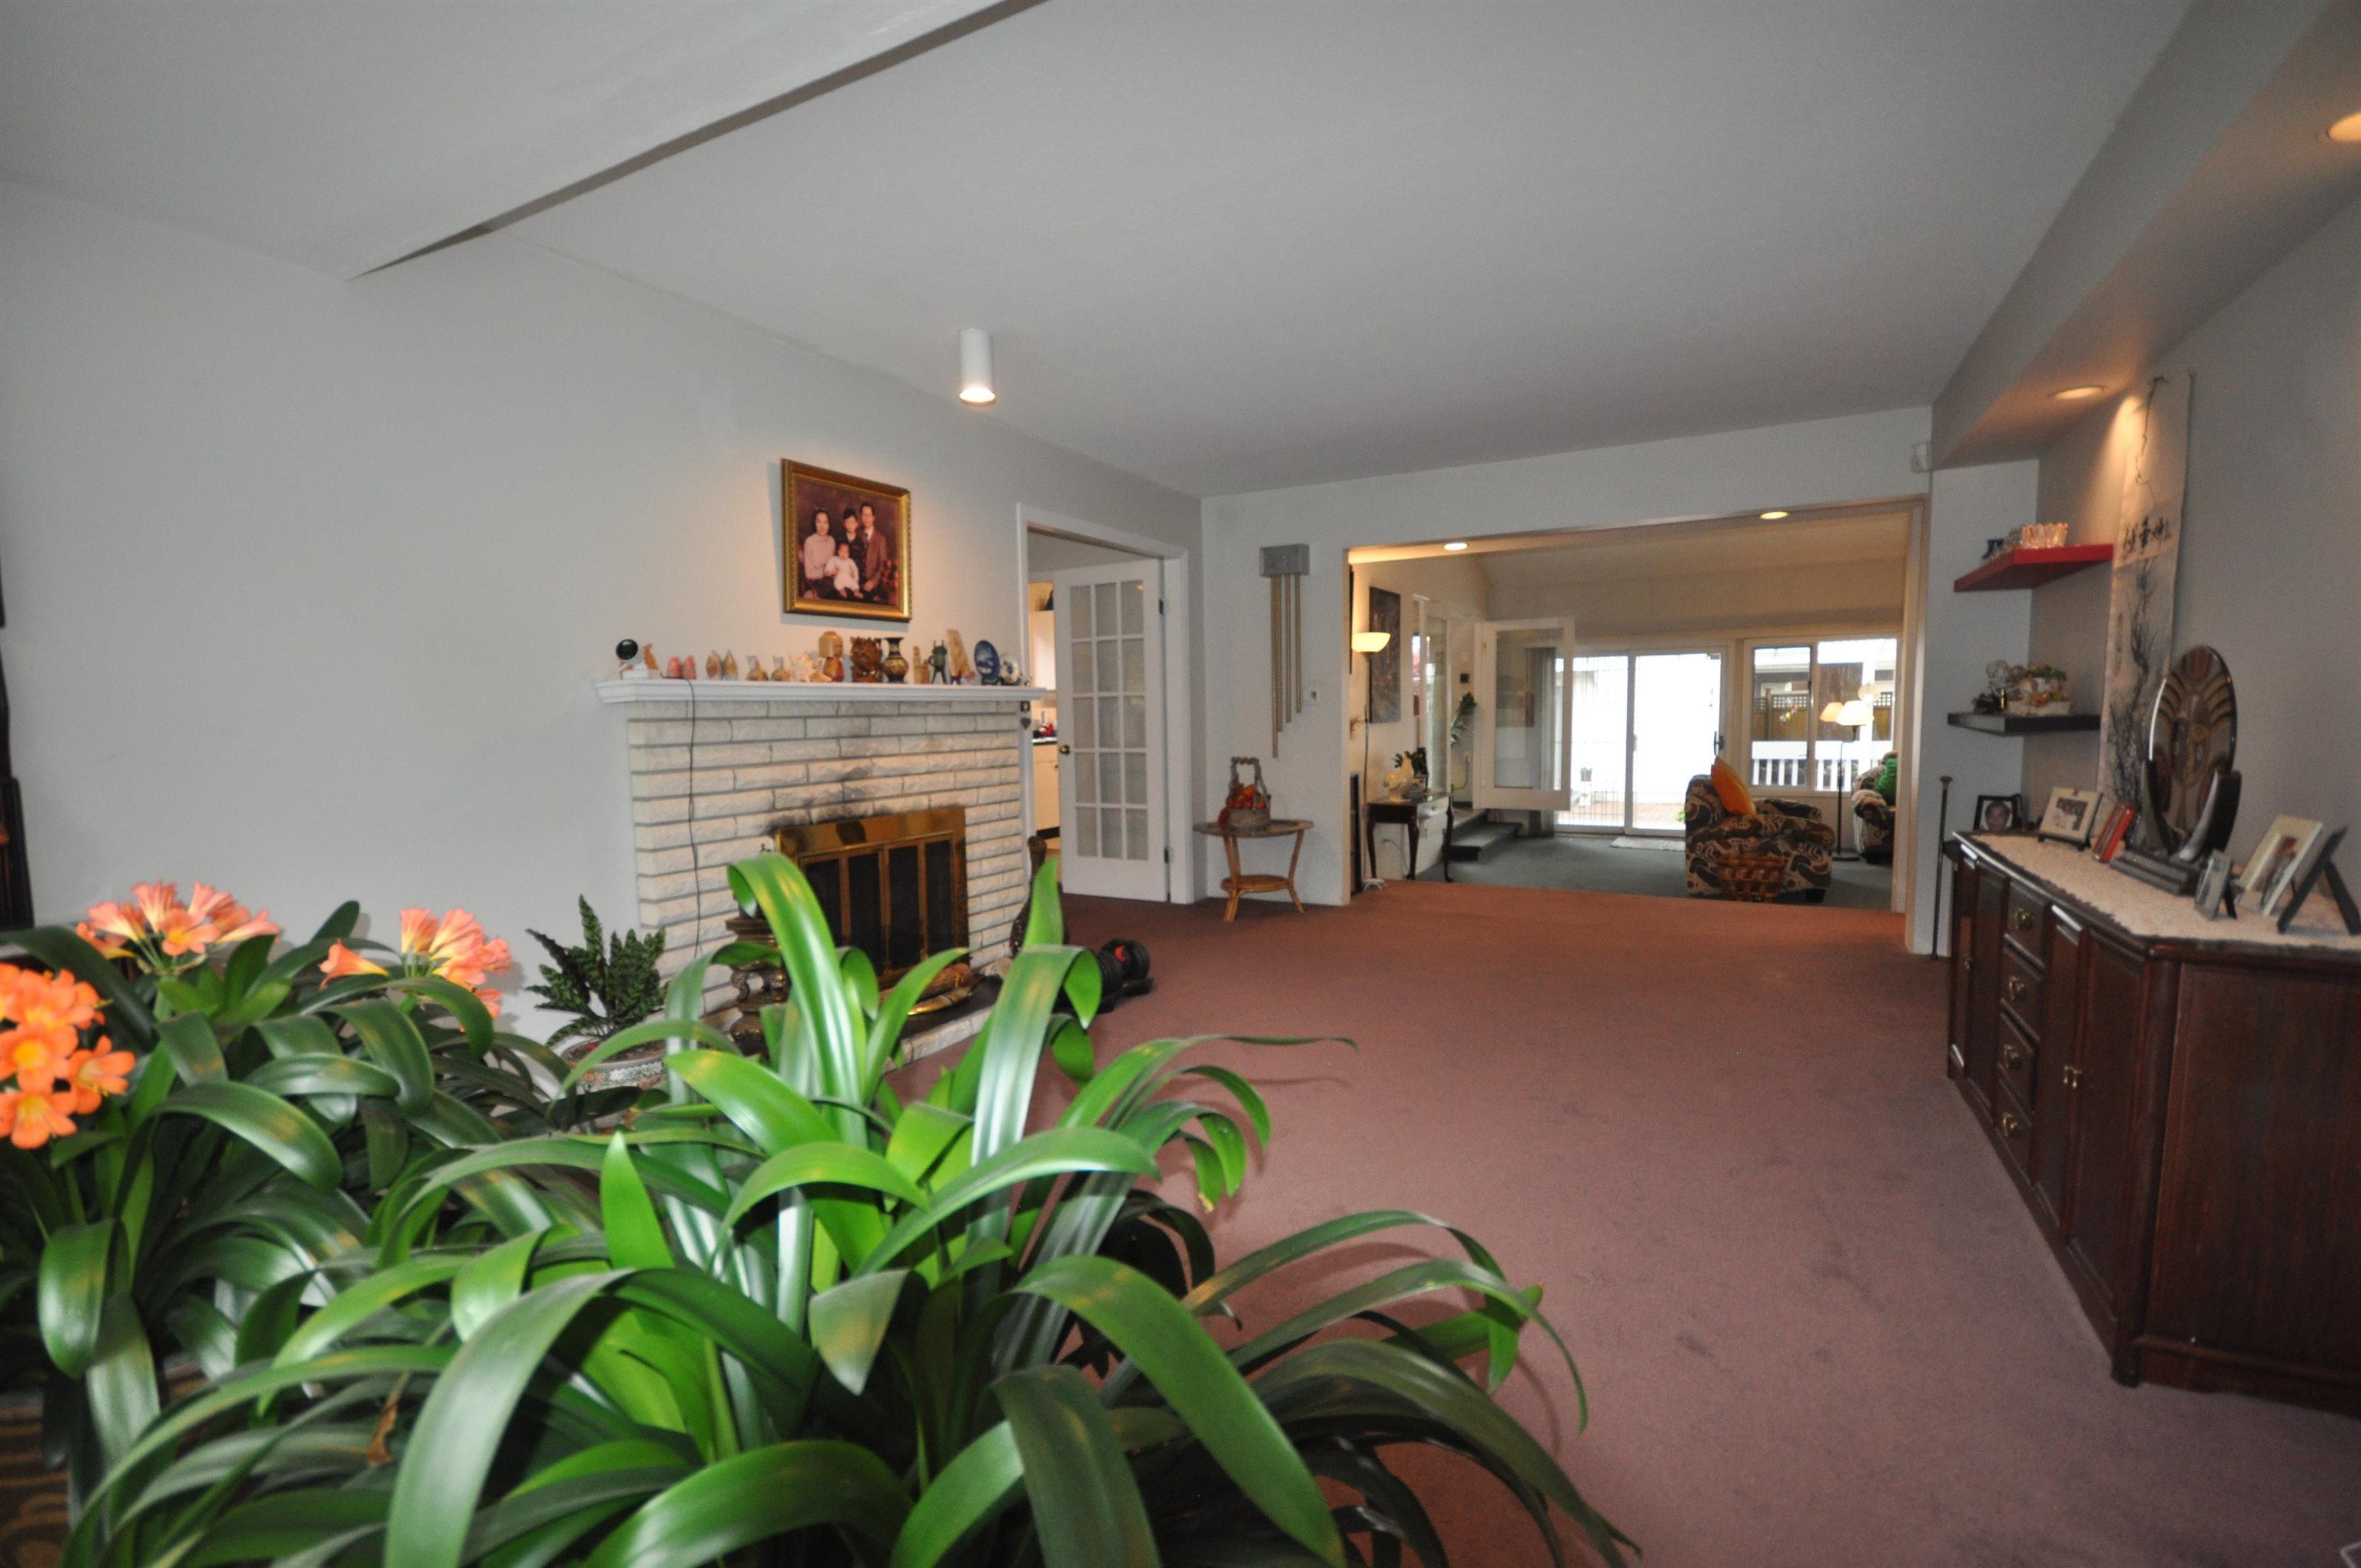 Listing image of 1613 W 61ST AVENUE